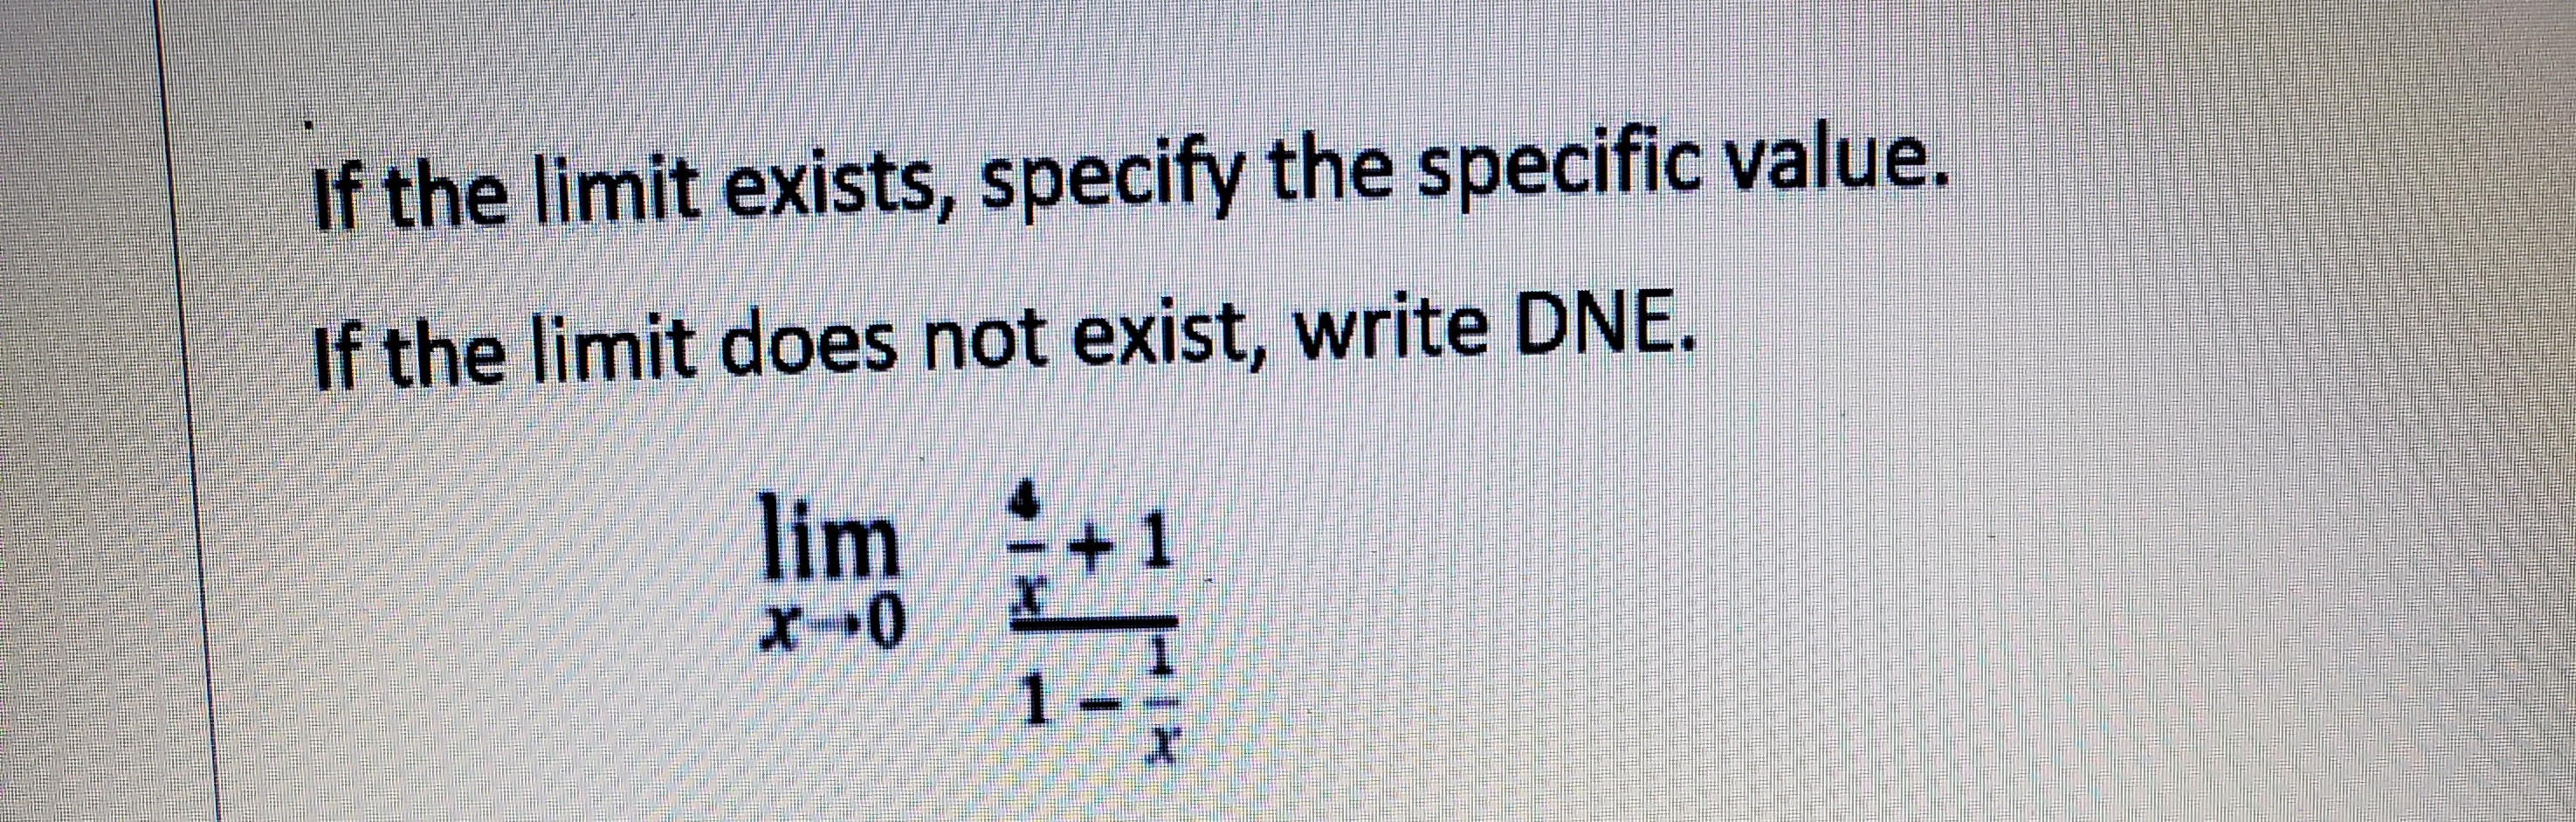 If the limit exists, specify the specific value.
If the limit does not exist, write DNE.
lim +1
1--
